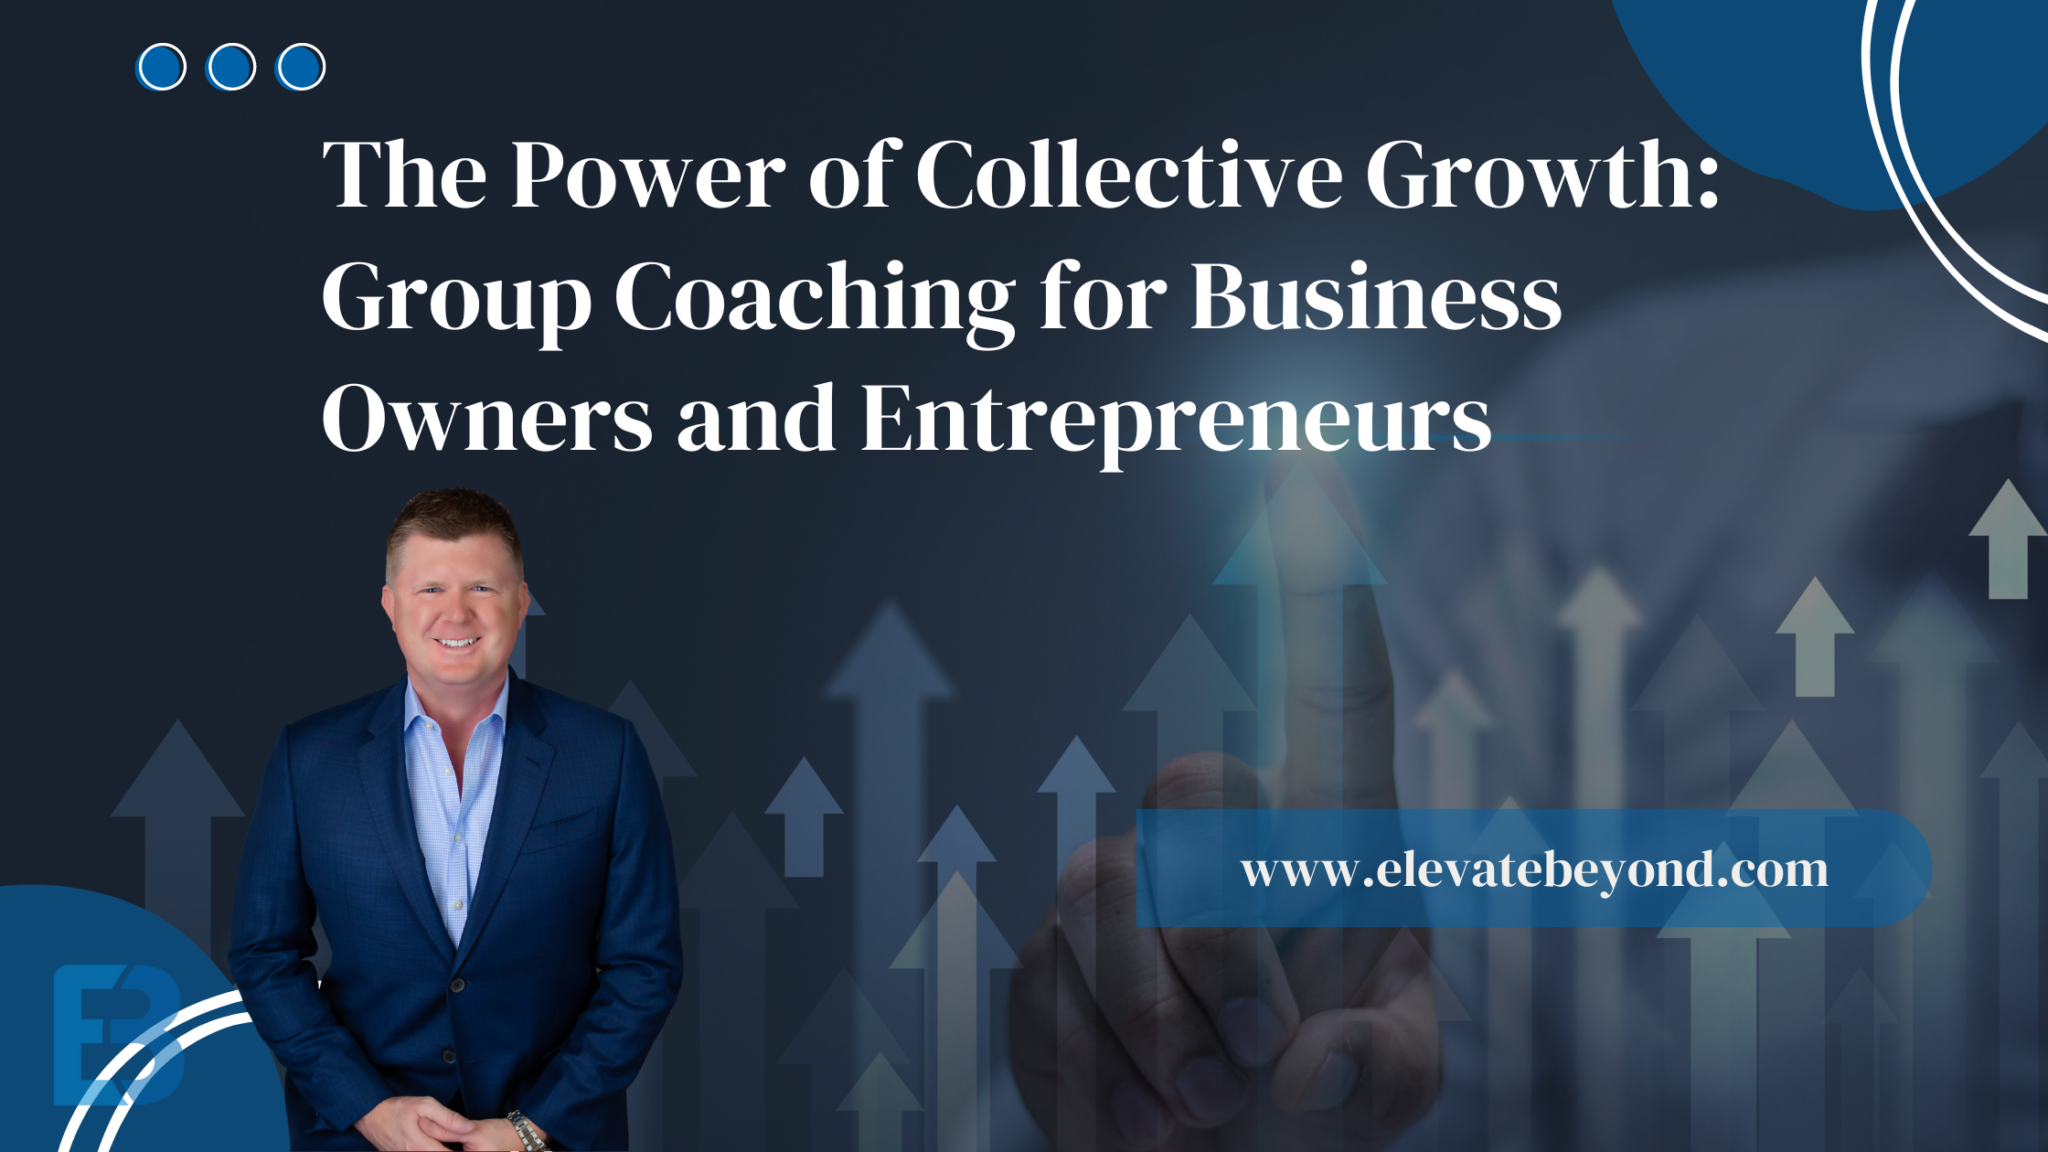 The Power of Collective Growth: Group Coaching for Business Owners and Entrepreneurs